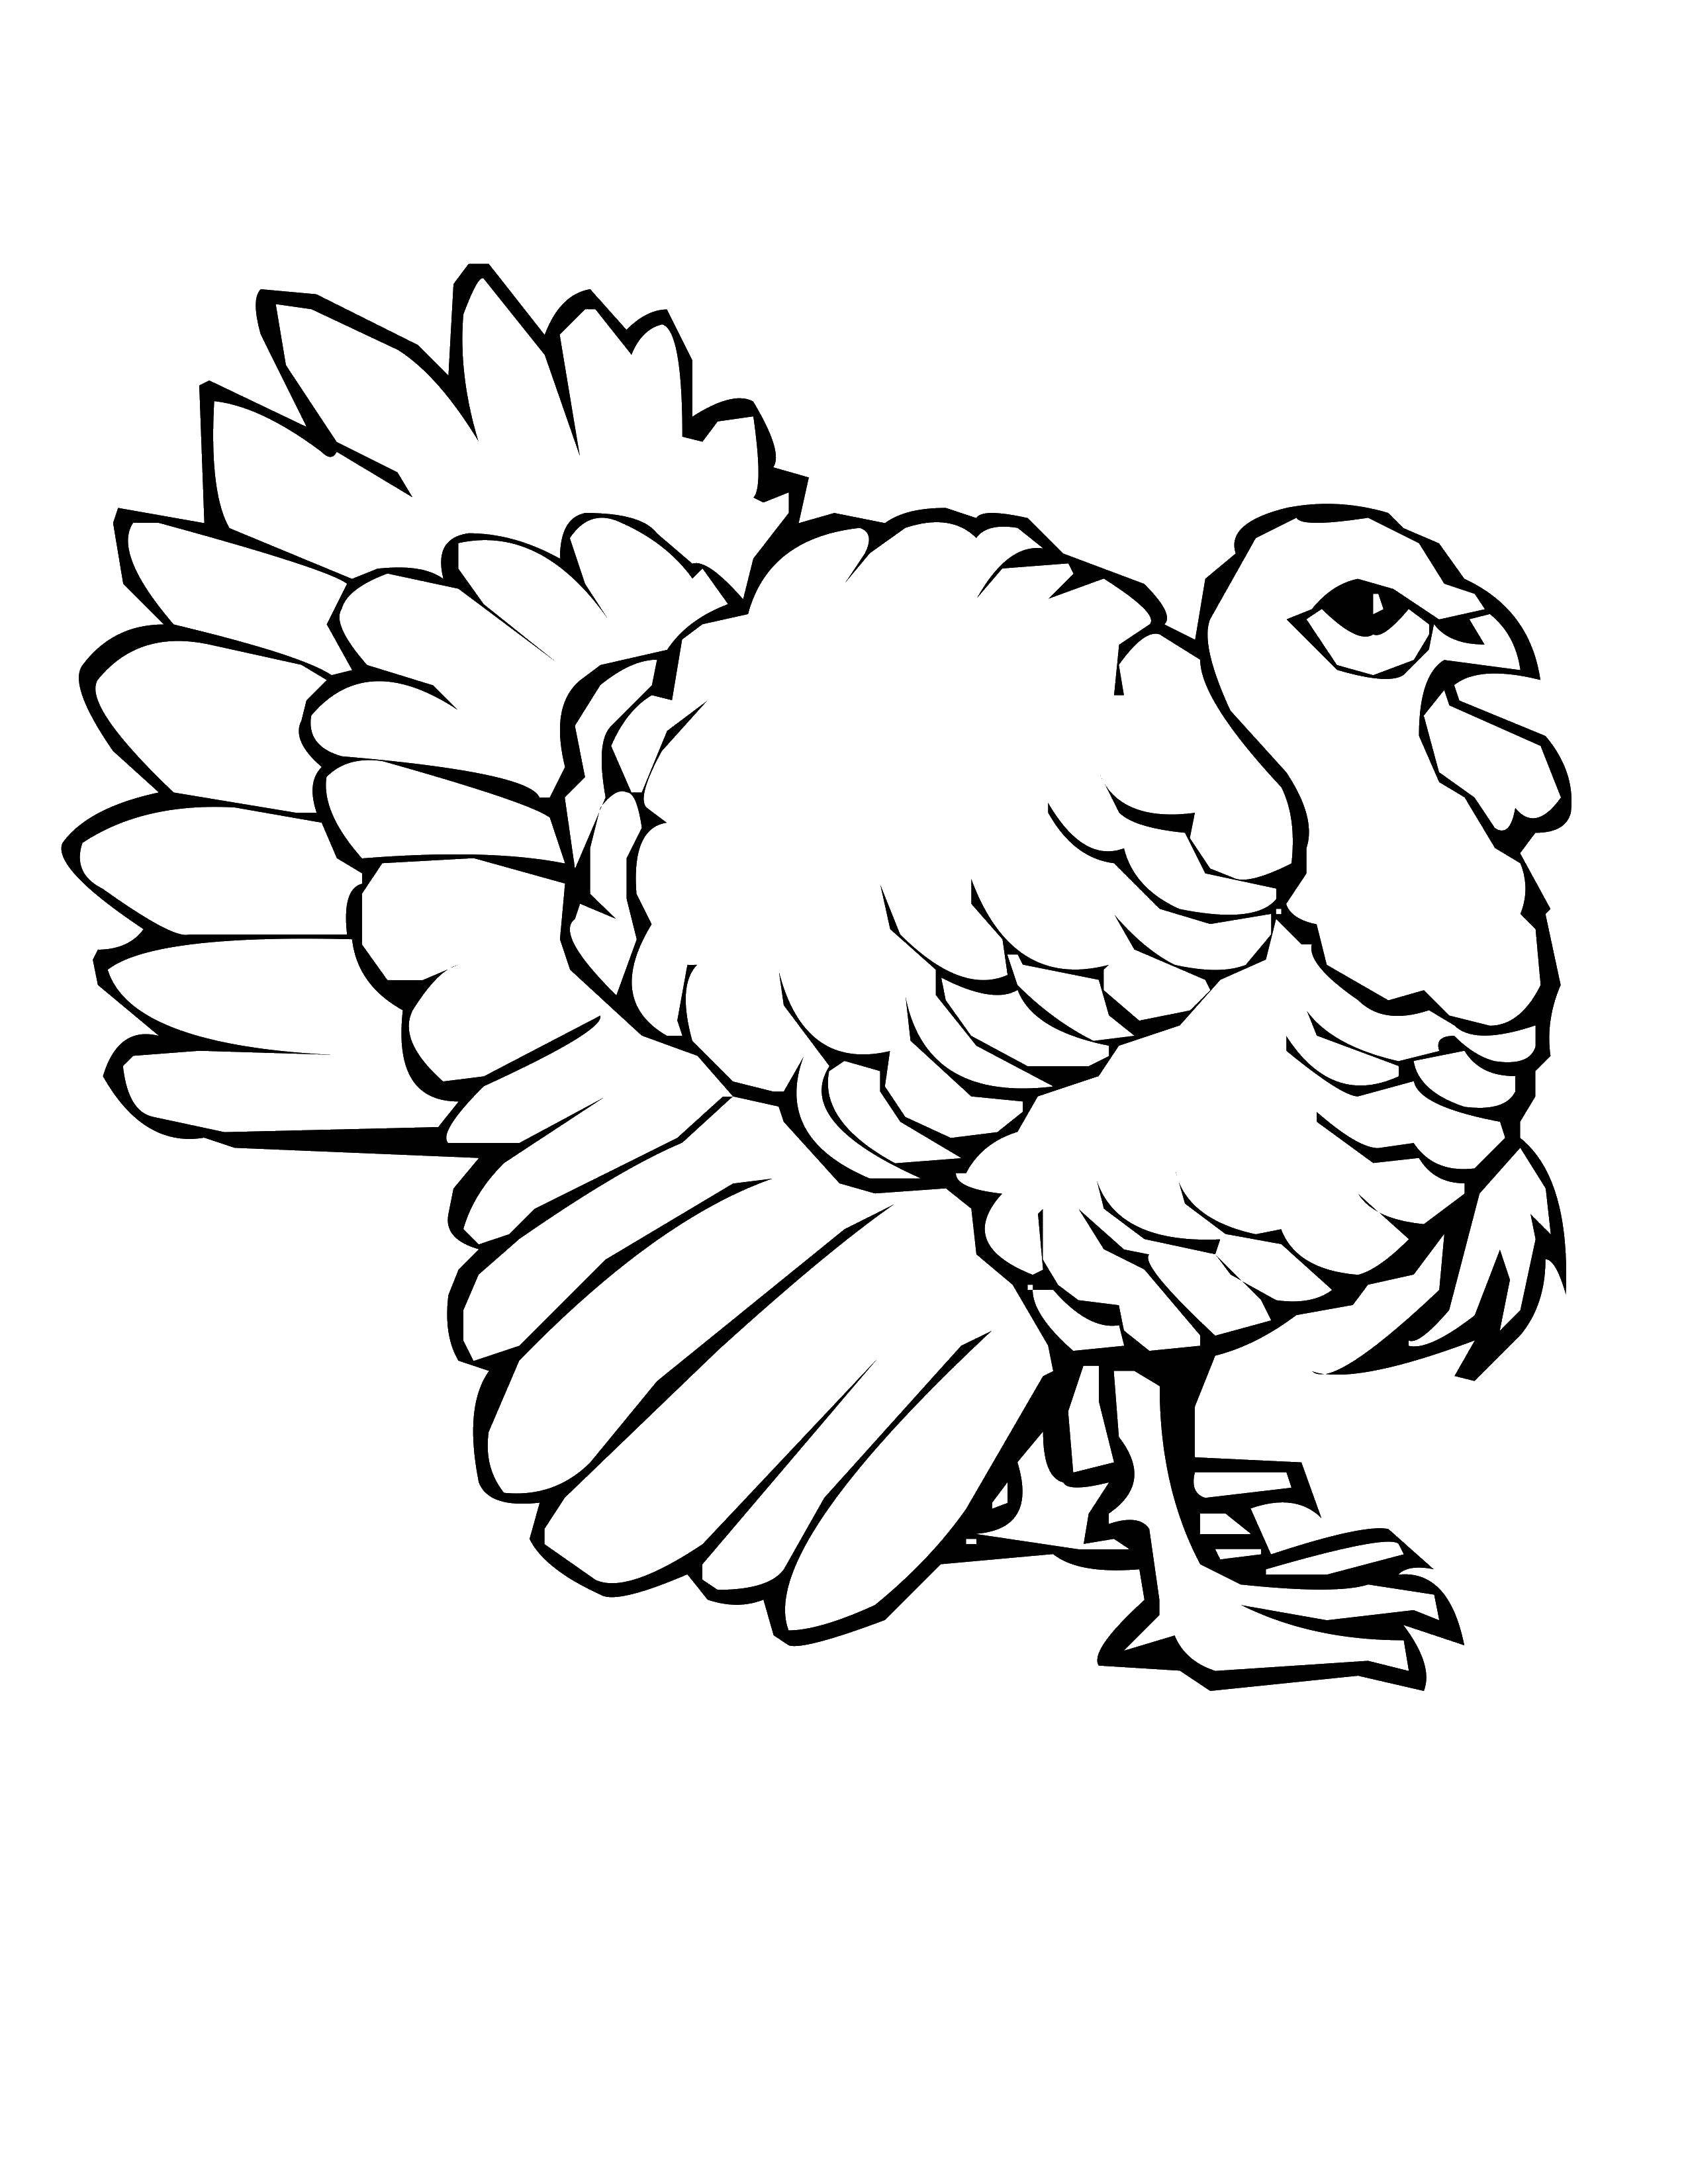 Coloring Turkey with a large tail. Category birds. Tags:  Poultry, Turkey.